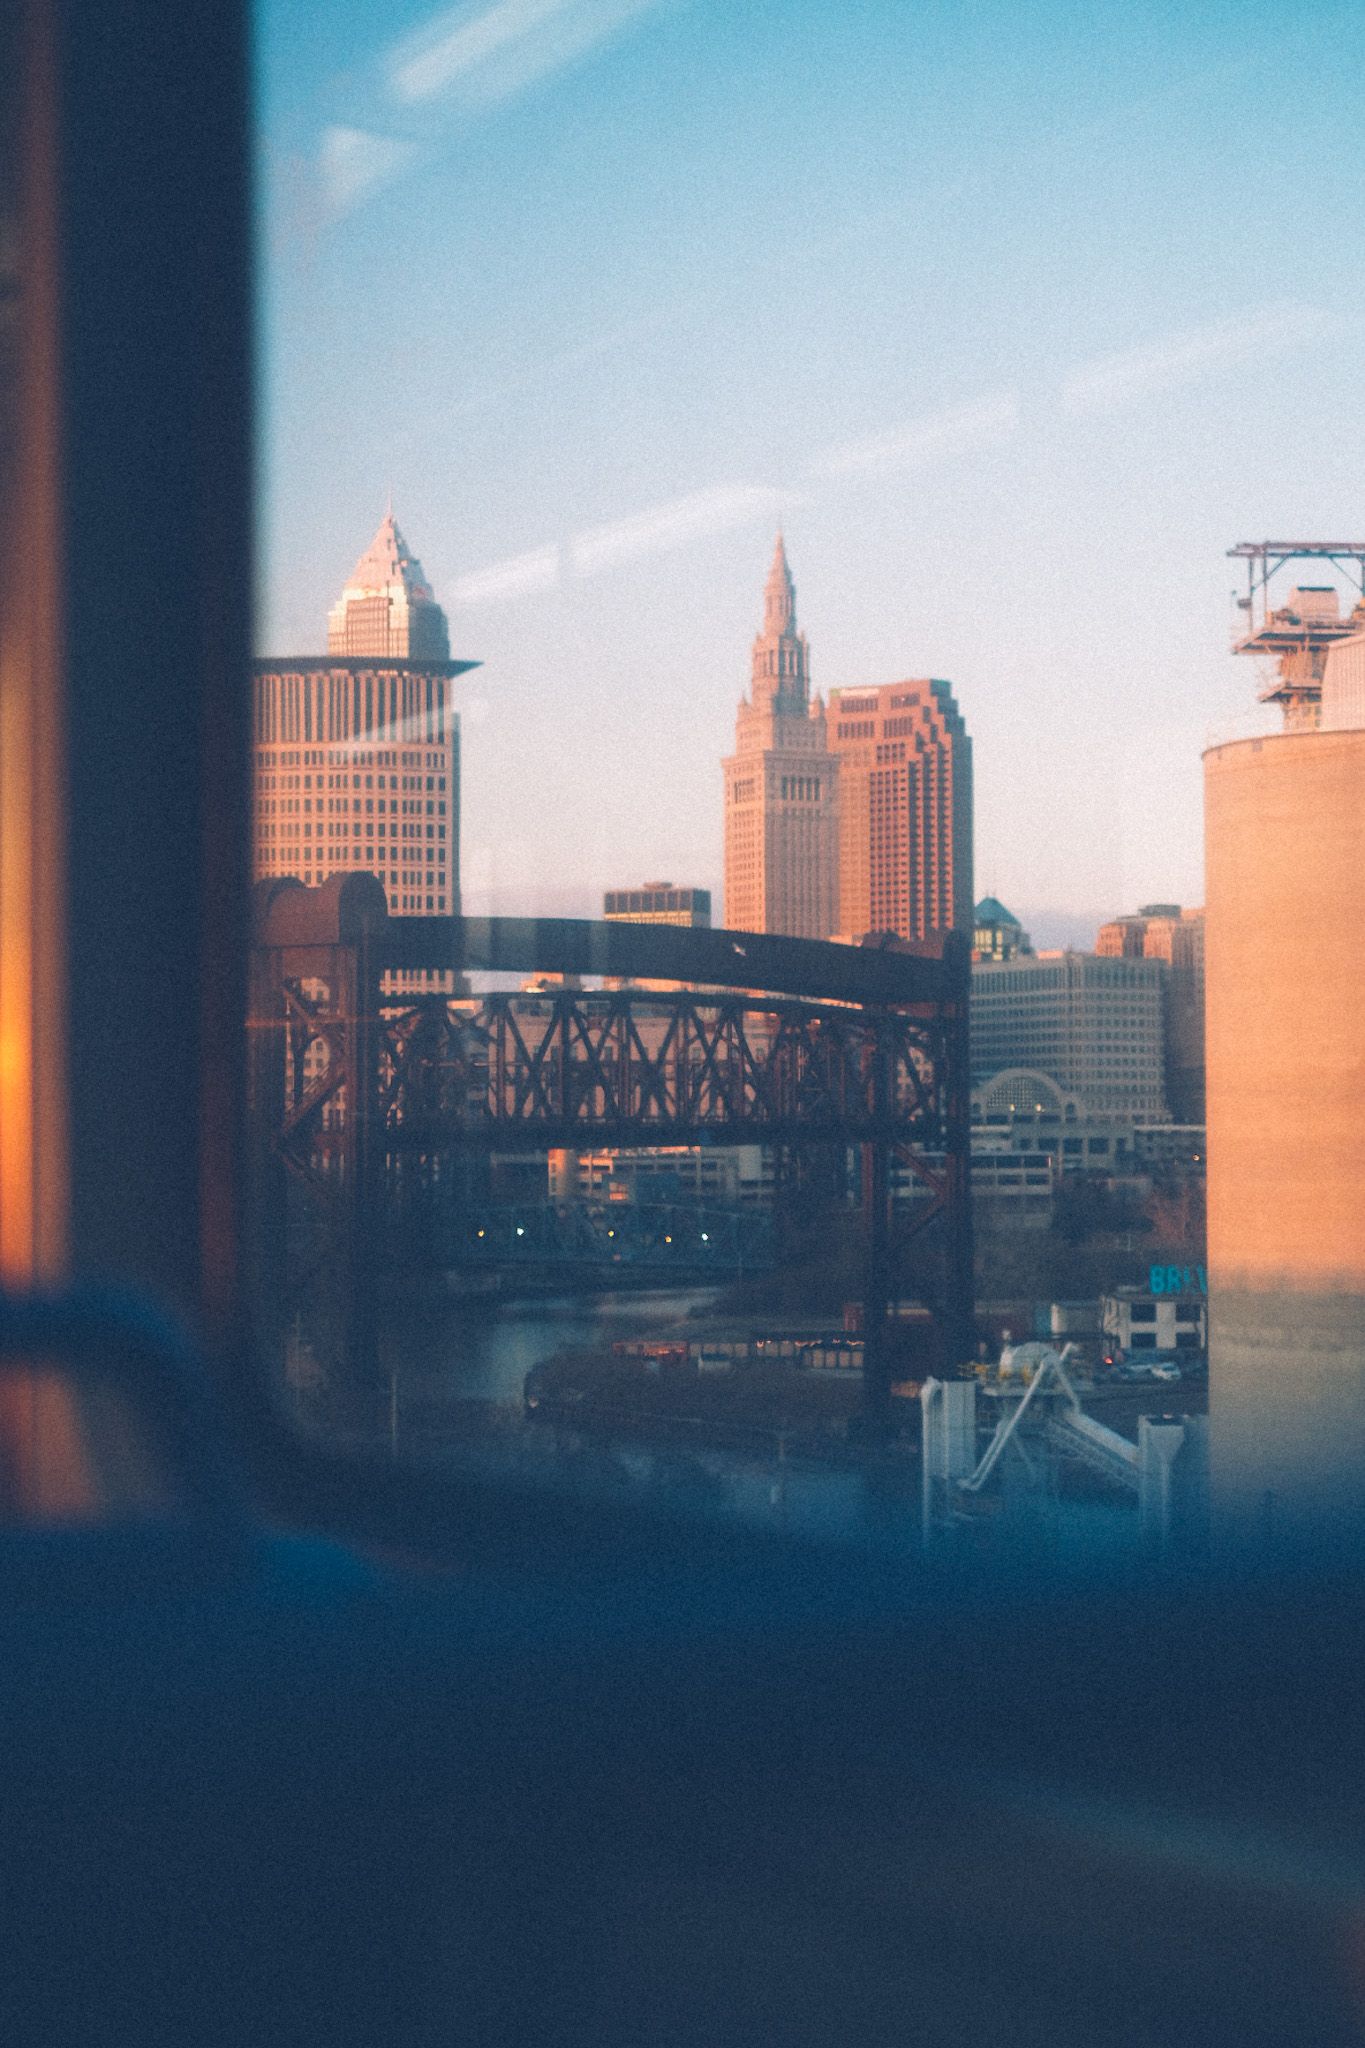 The skyline of downtown Cleveland glimmers in the sunlight from inside the train. A few buildings and a bridge appear in layers.